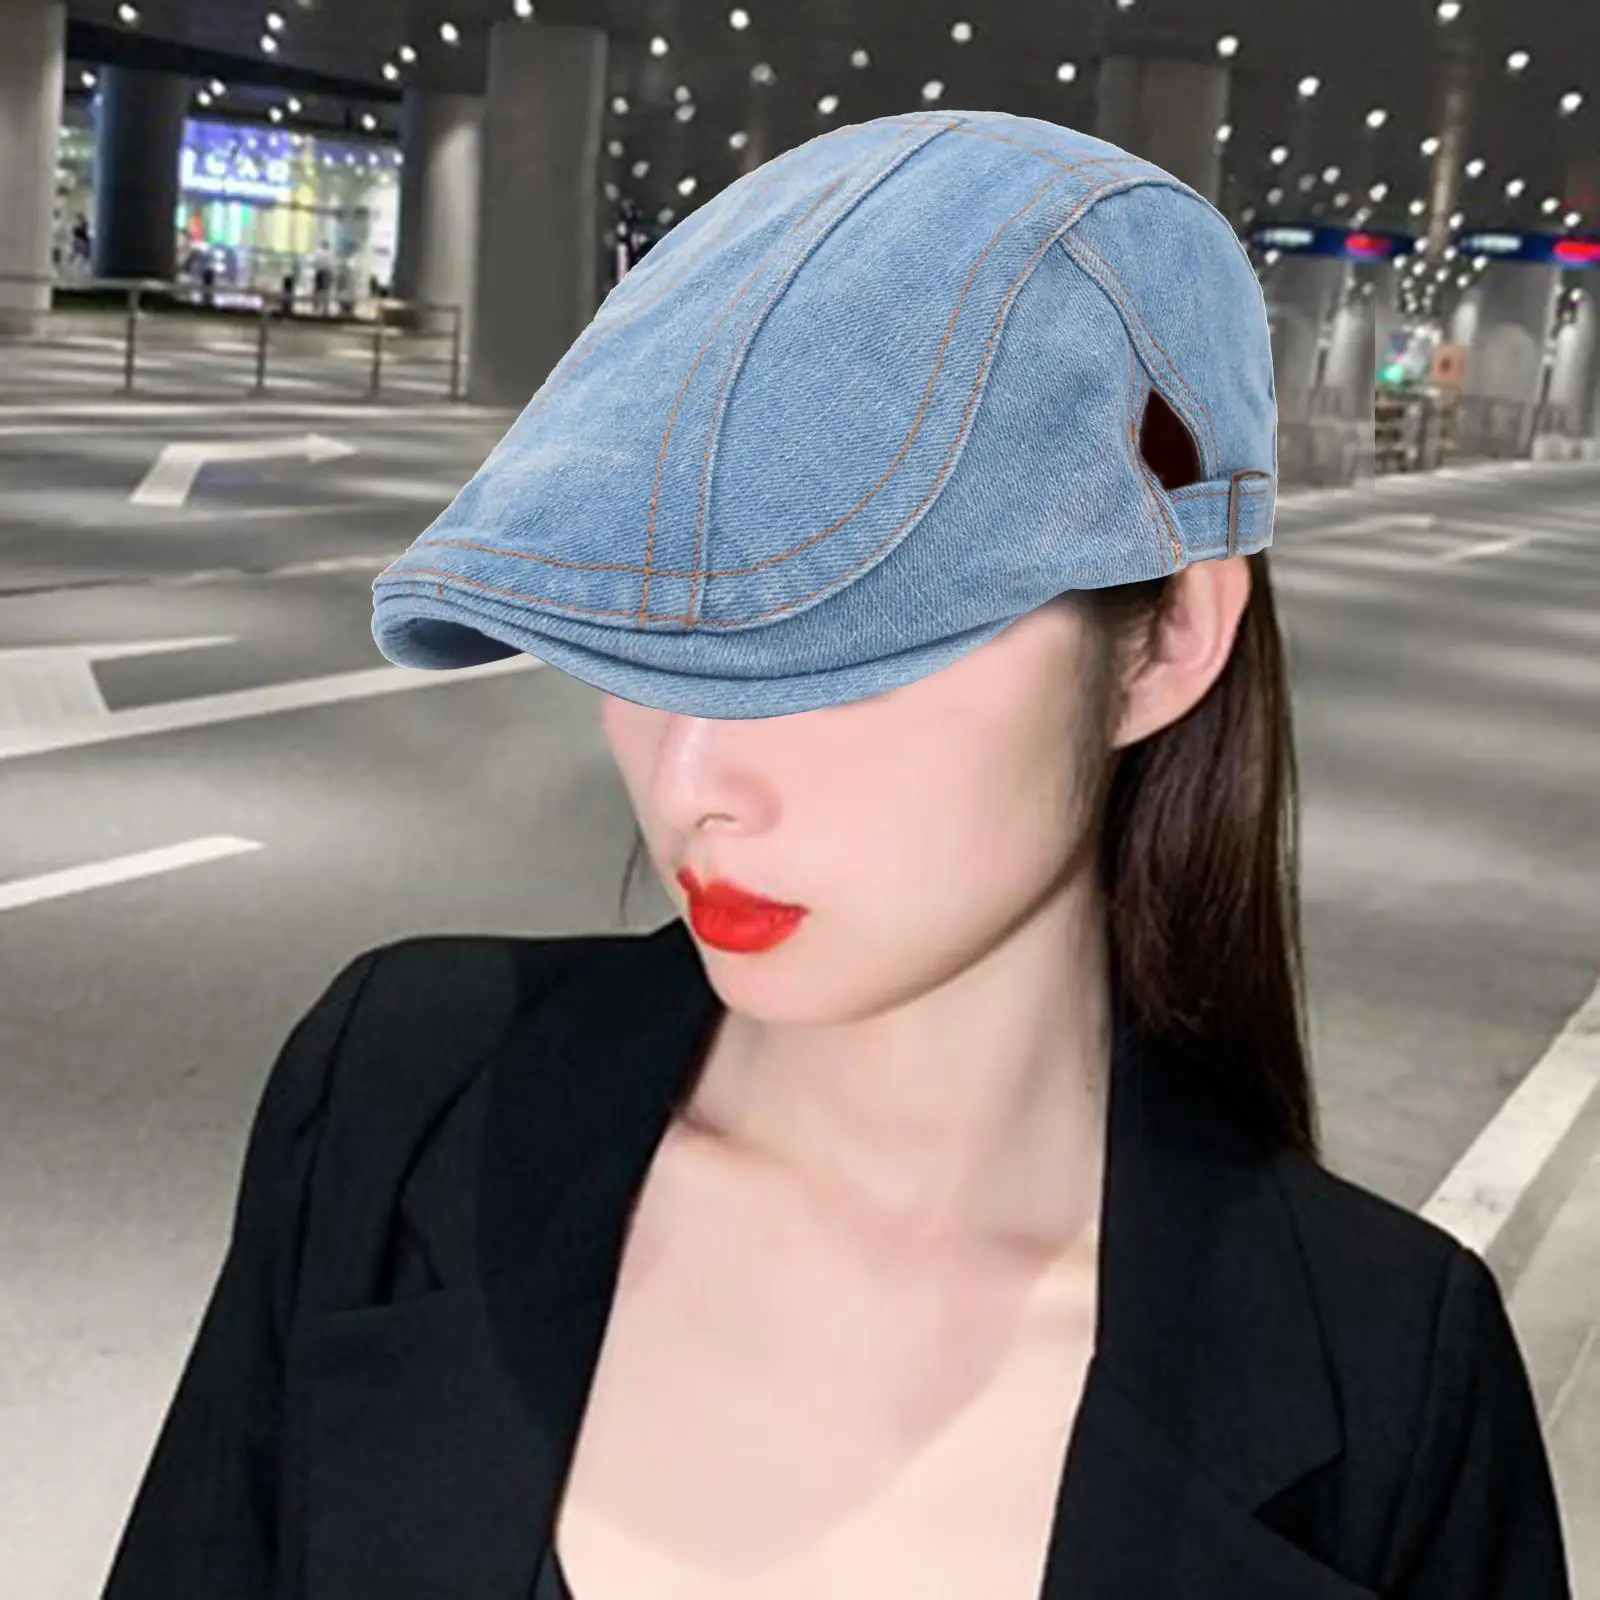 Unisex Newsboy Hat,  Driving Hunting Cabbie  Caps for Adjustable